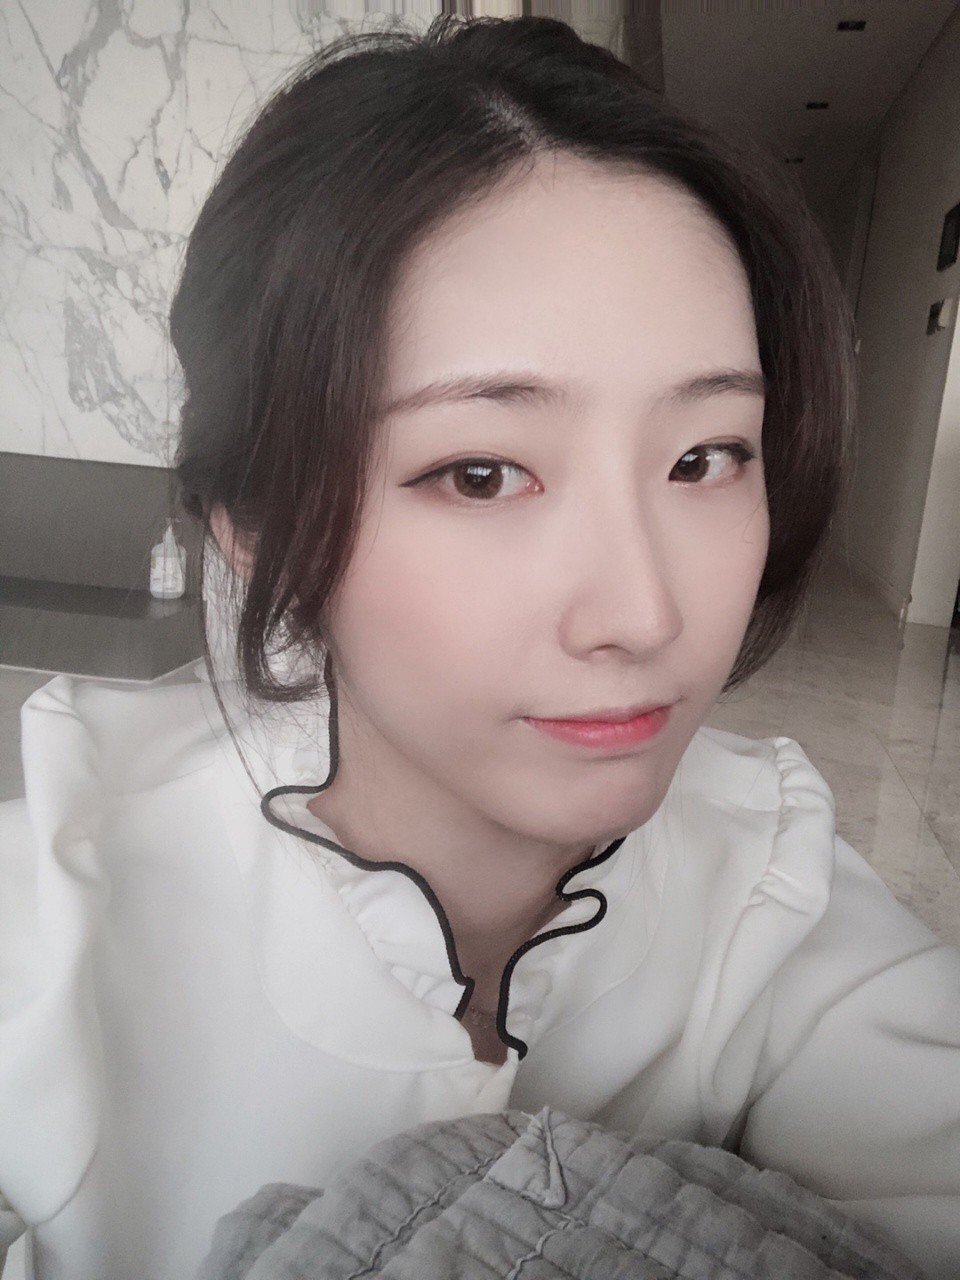 July 20, 2021 LOONA Twitter Update - Haseul | Kpopping